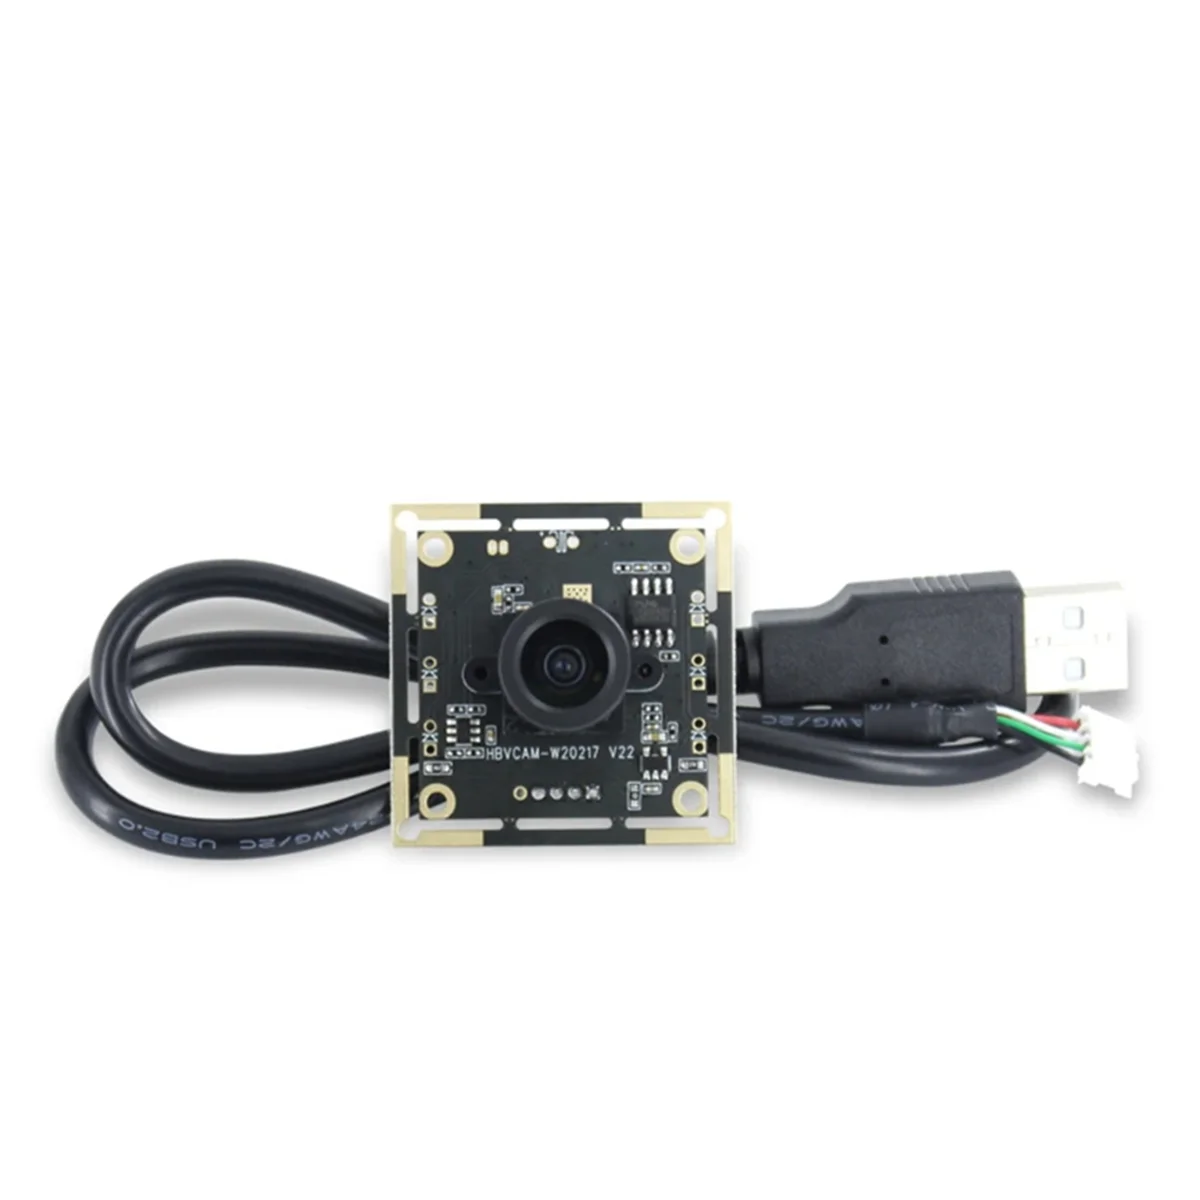 

OV9732 1MP Camera Module 100 Degree MJPG/YUY2 Adjustable Manual Focus 1280X720 PCB Board with 2M Cable for WinXP/7/8/10